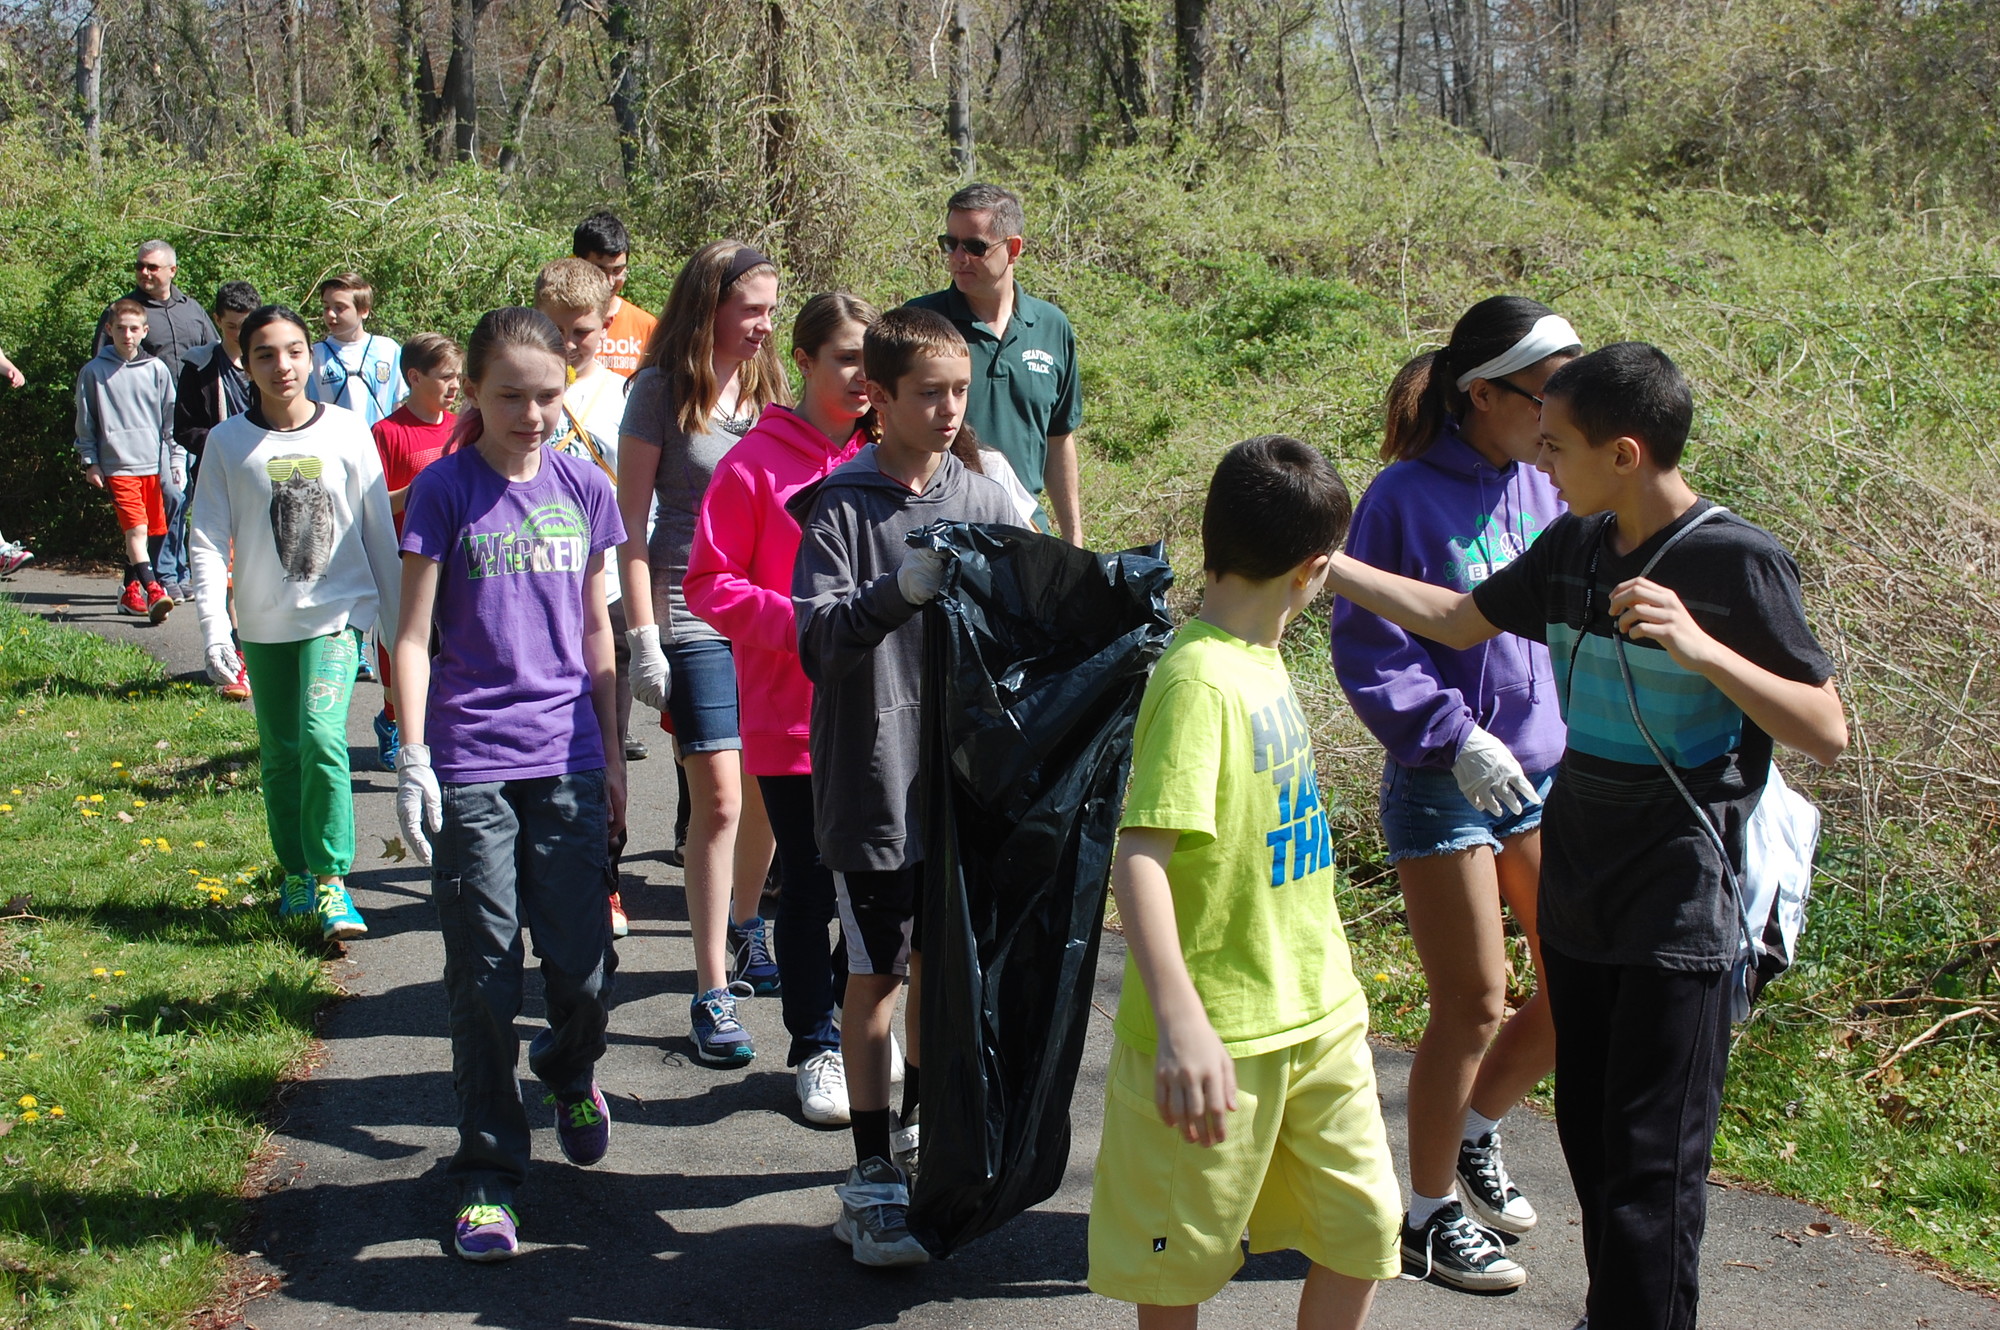 Seventh-graders from Seaford Middle School walked through the grounds of the Tackapausha Preserve on May 7 to clean up litter.